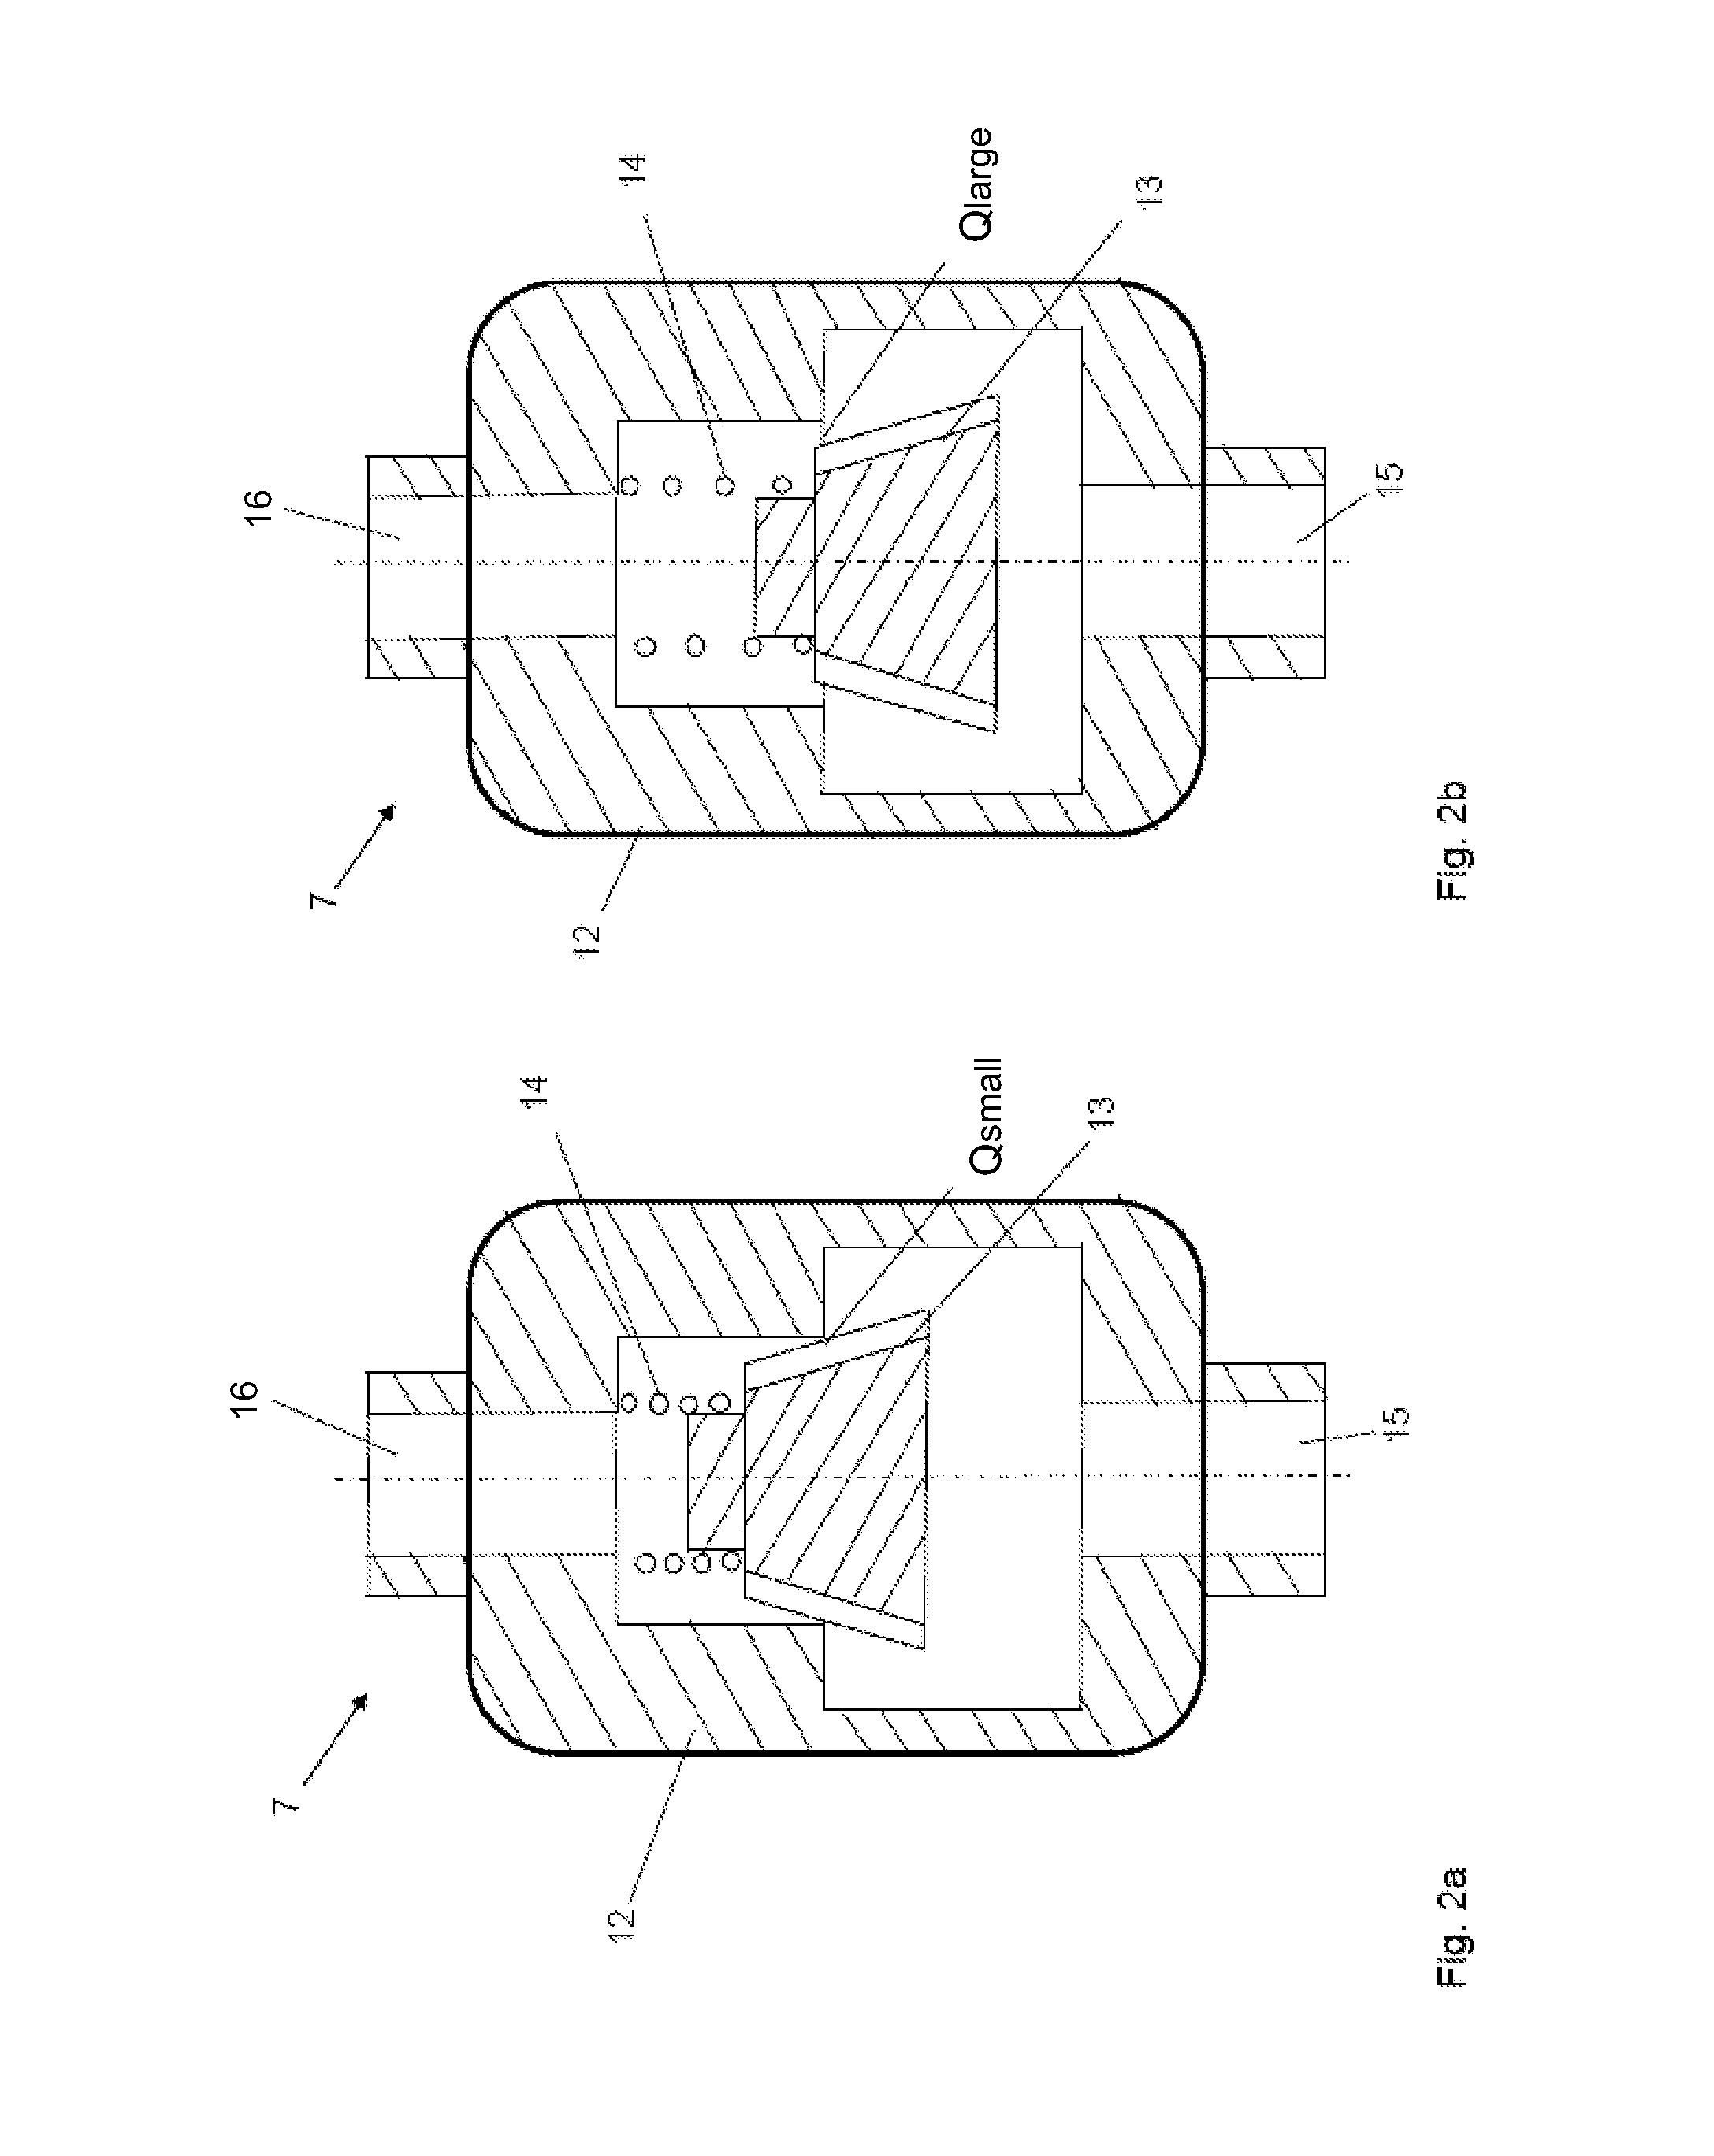 Liquid-cooled internal combustion engine with afterrun cooling, and method for operating an internal combustion engine of said type